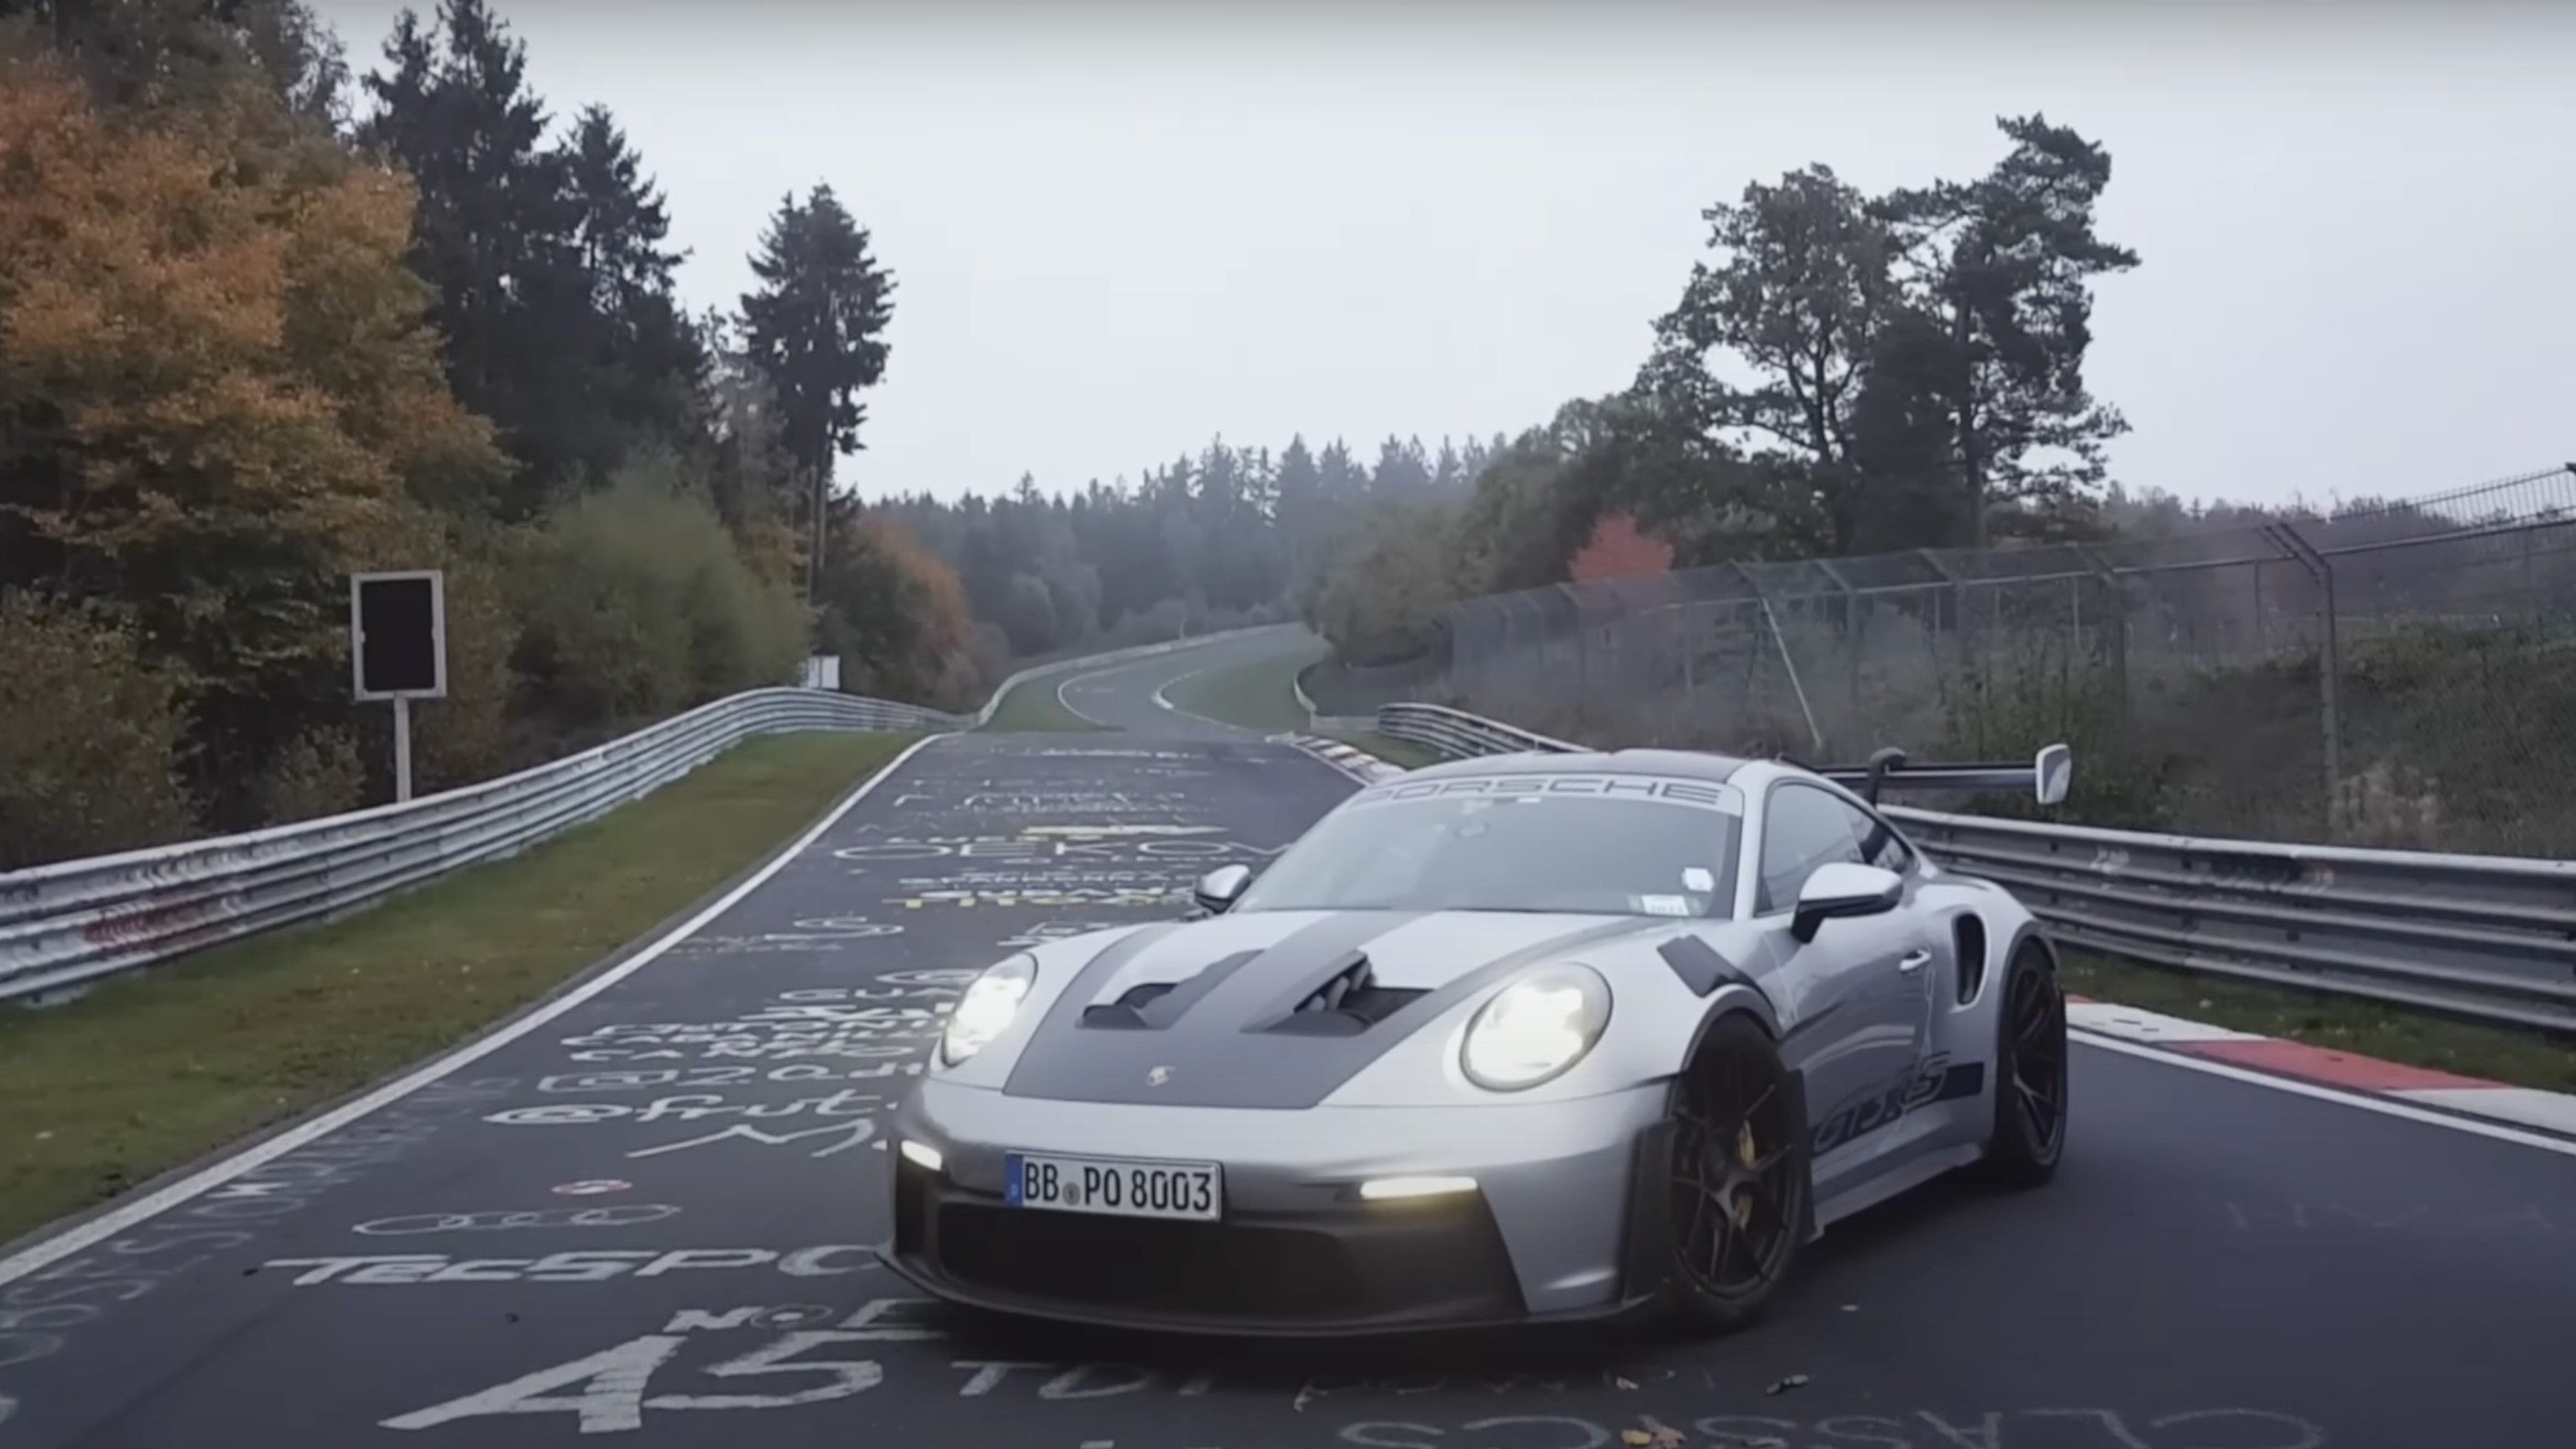 New Porsche 911 GT3 RS laps the Nürburgring 10 seconds faster than regular  GT3